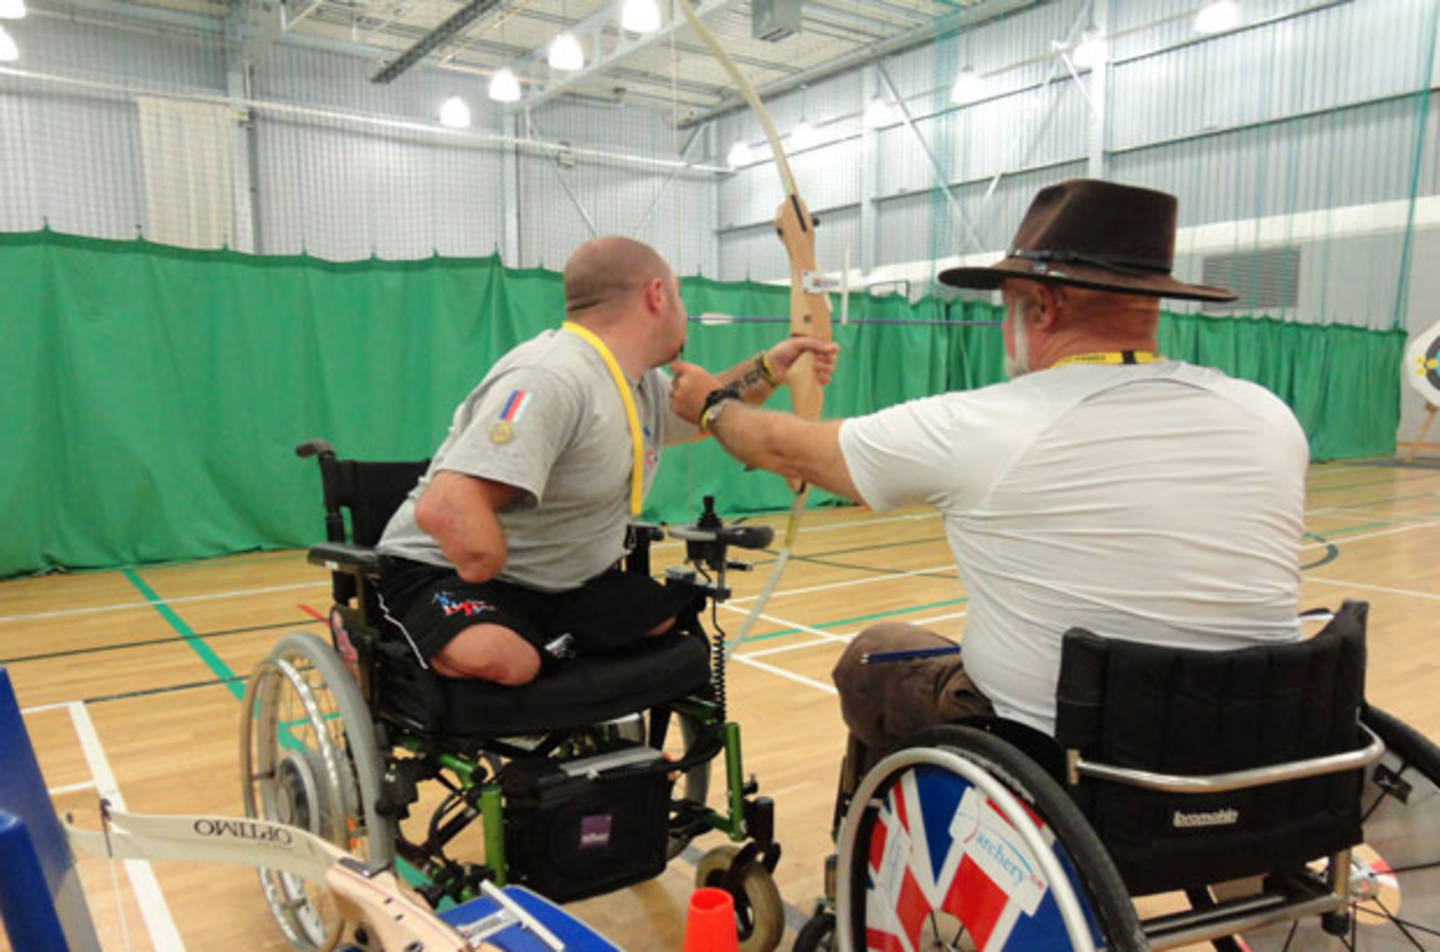 Image shows man in a wheelchair shooting an arrow in archery session